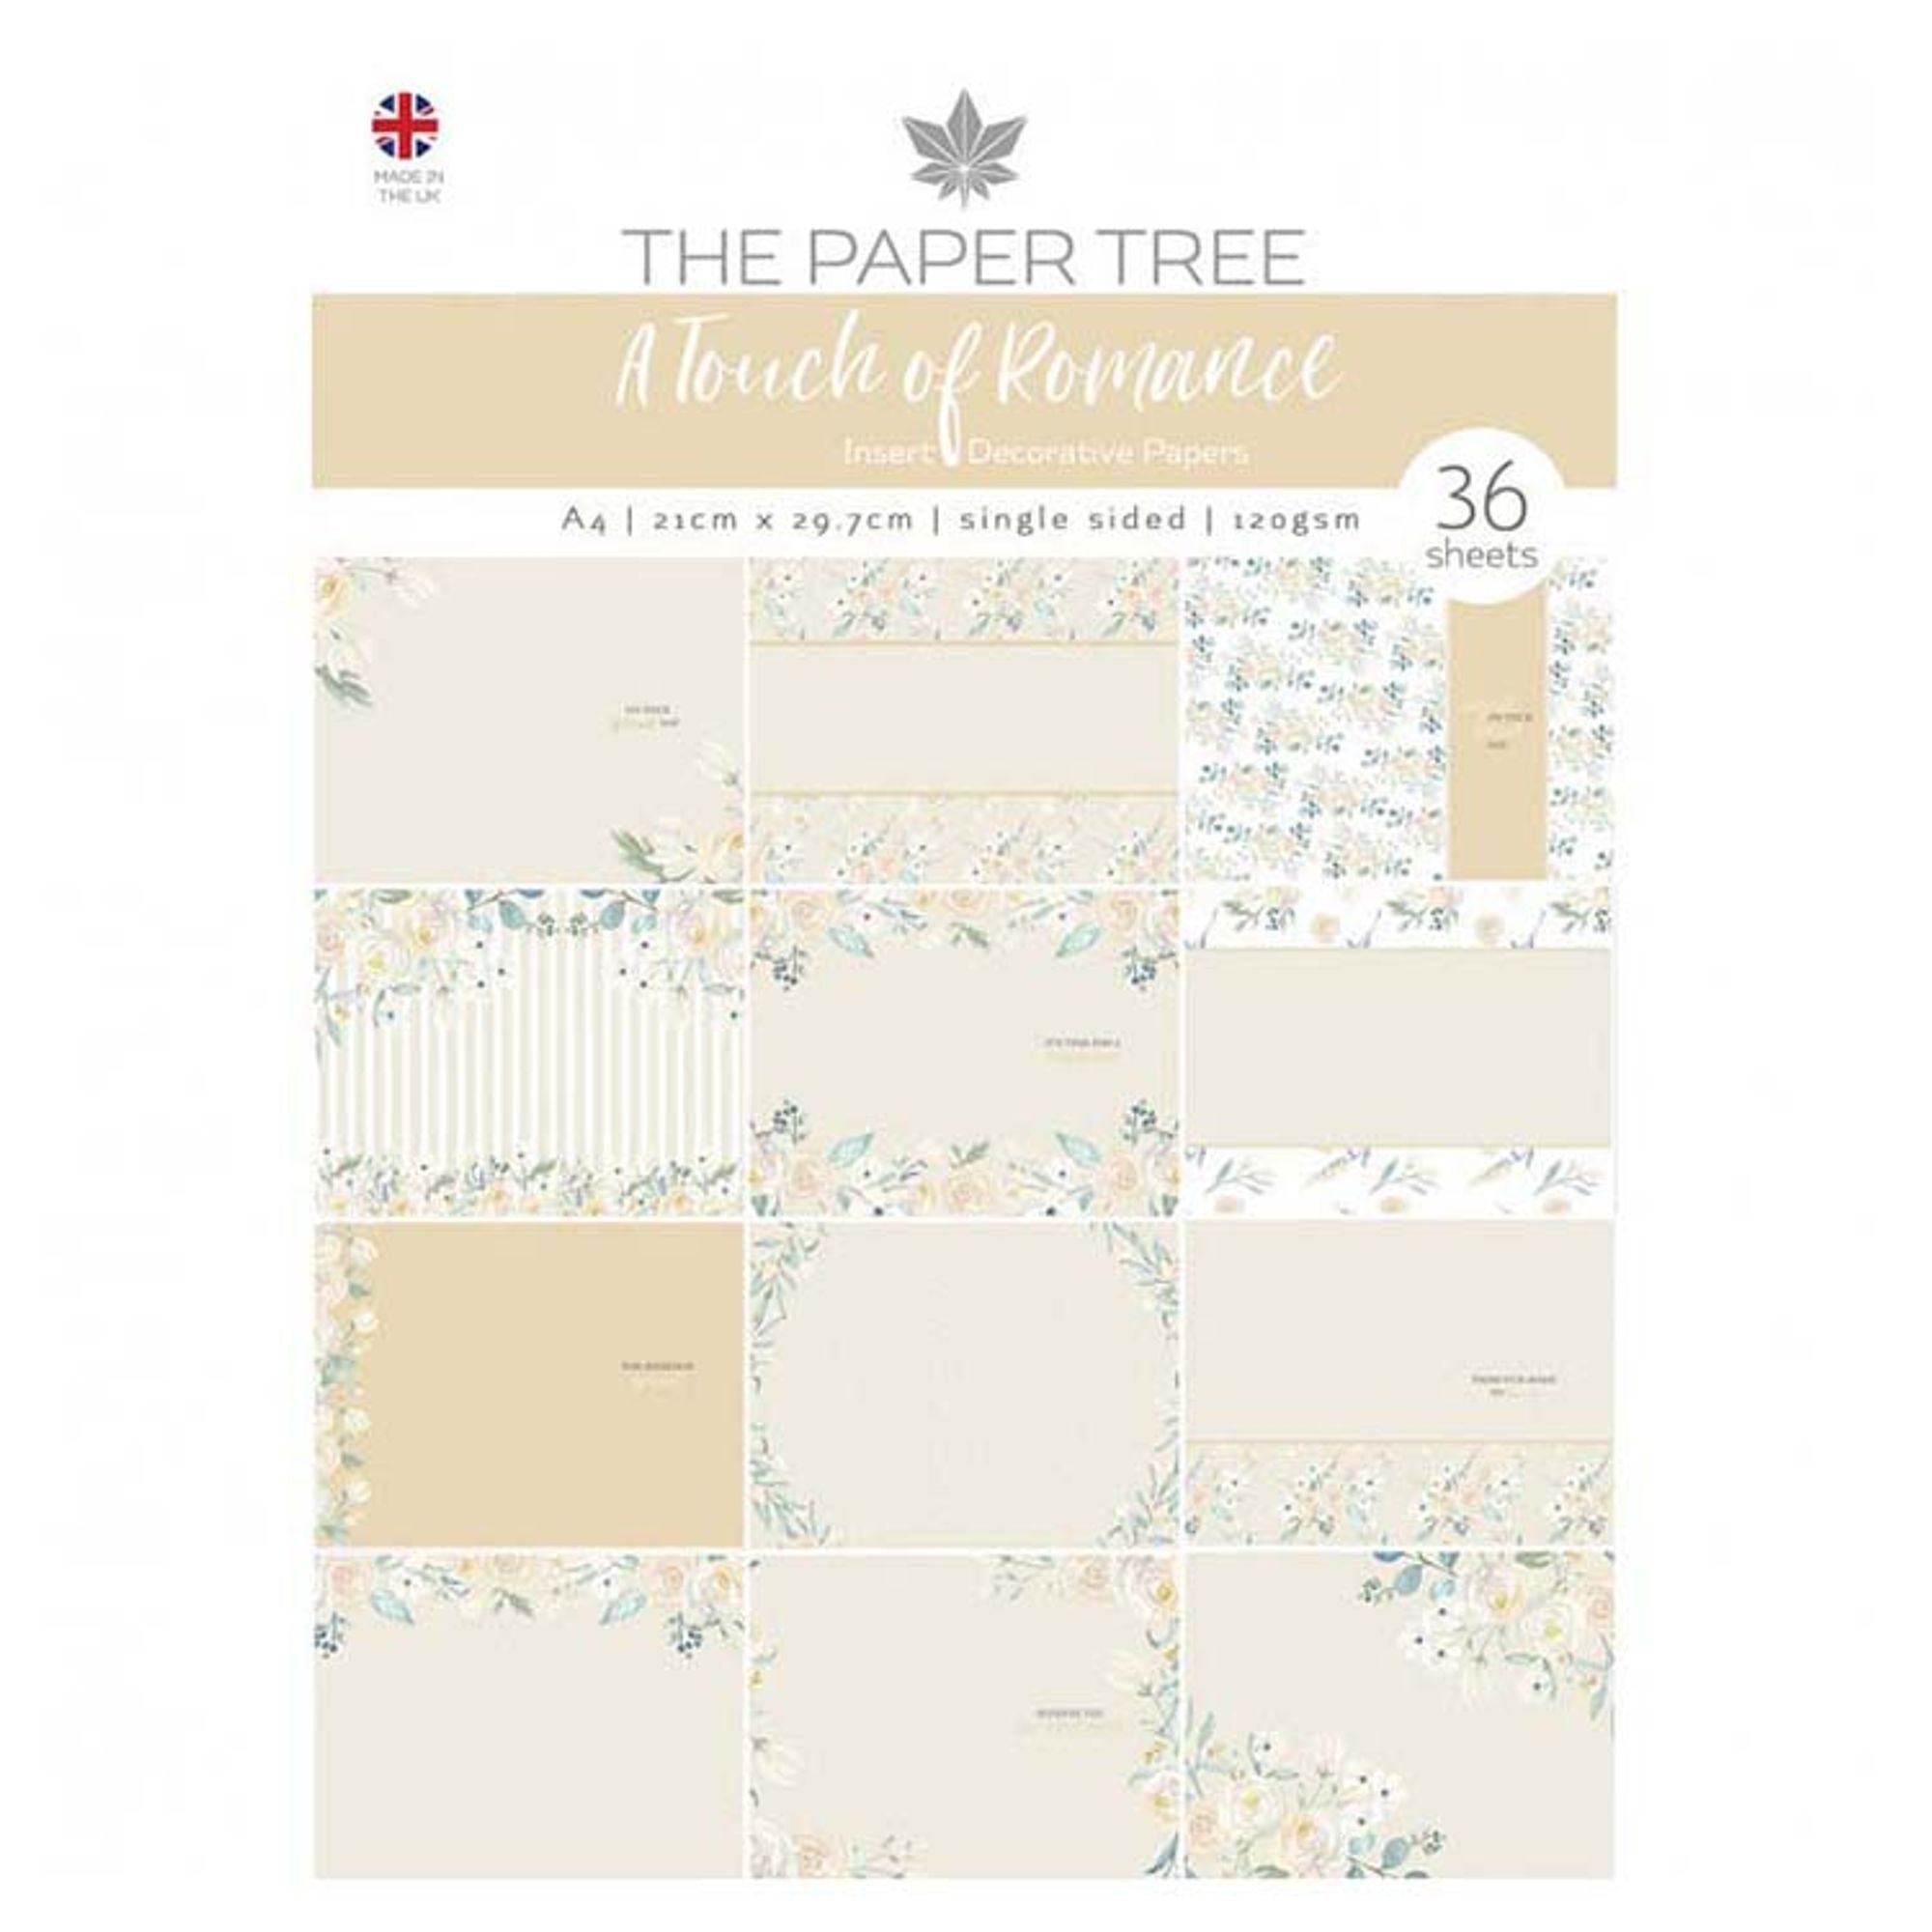 The Paper Tree A Touch of Romance Insert Collection